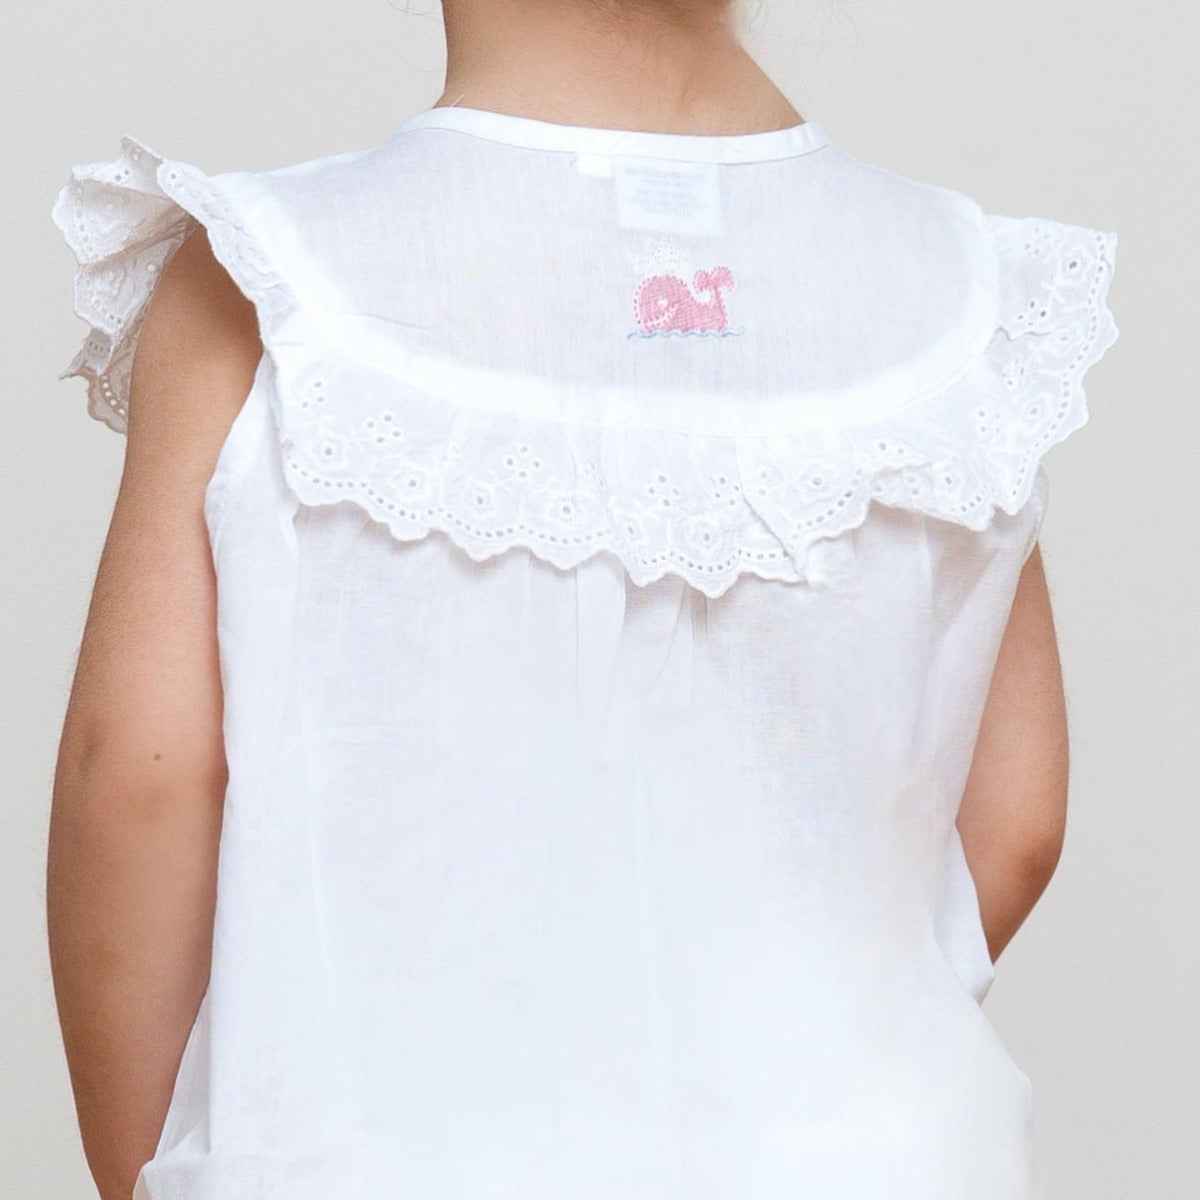 Wendy Whale White Cotton Dress, Embroidered